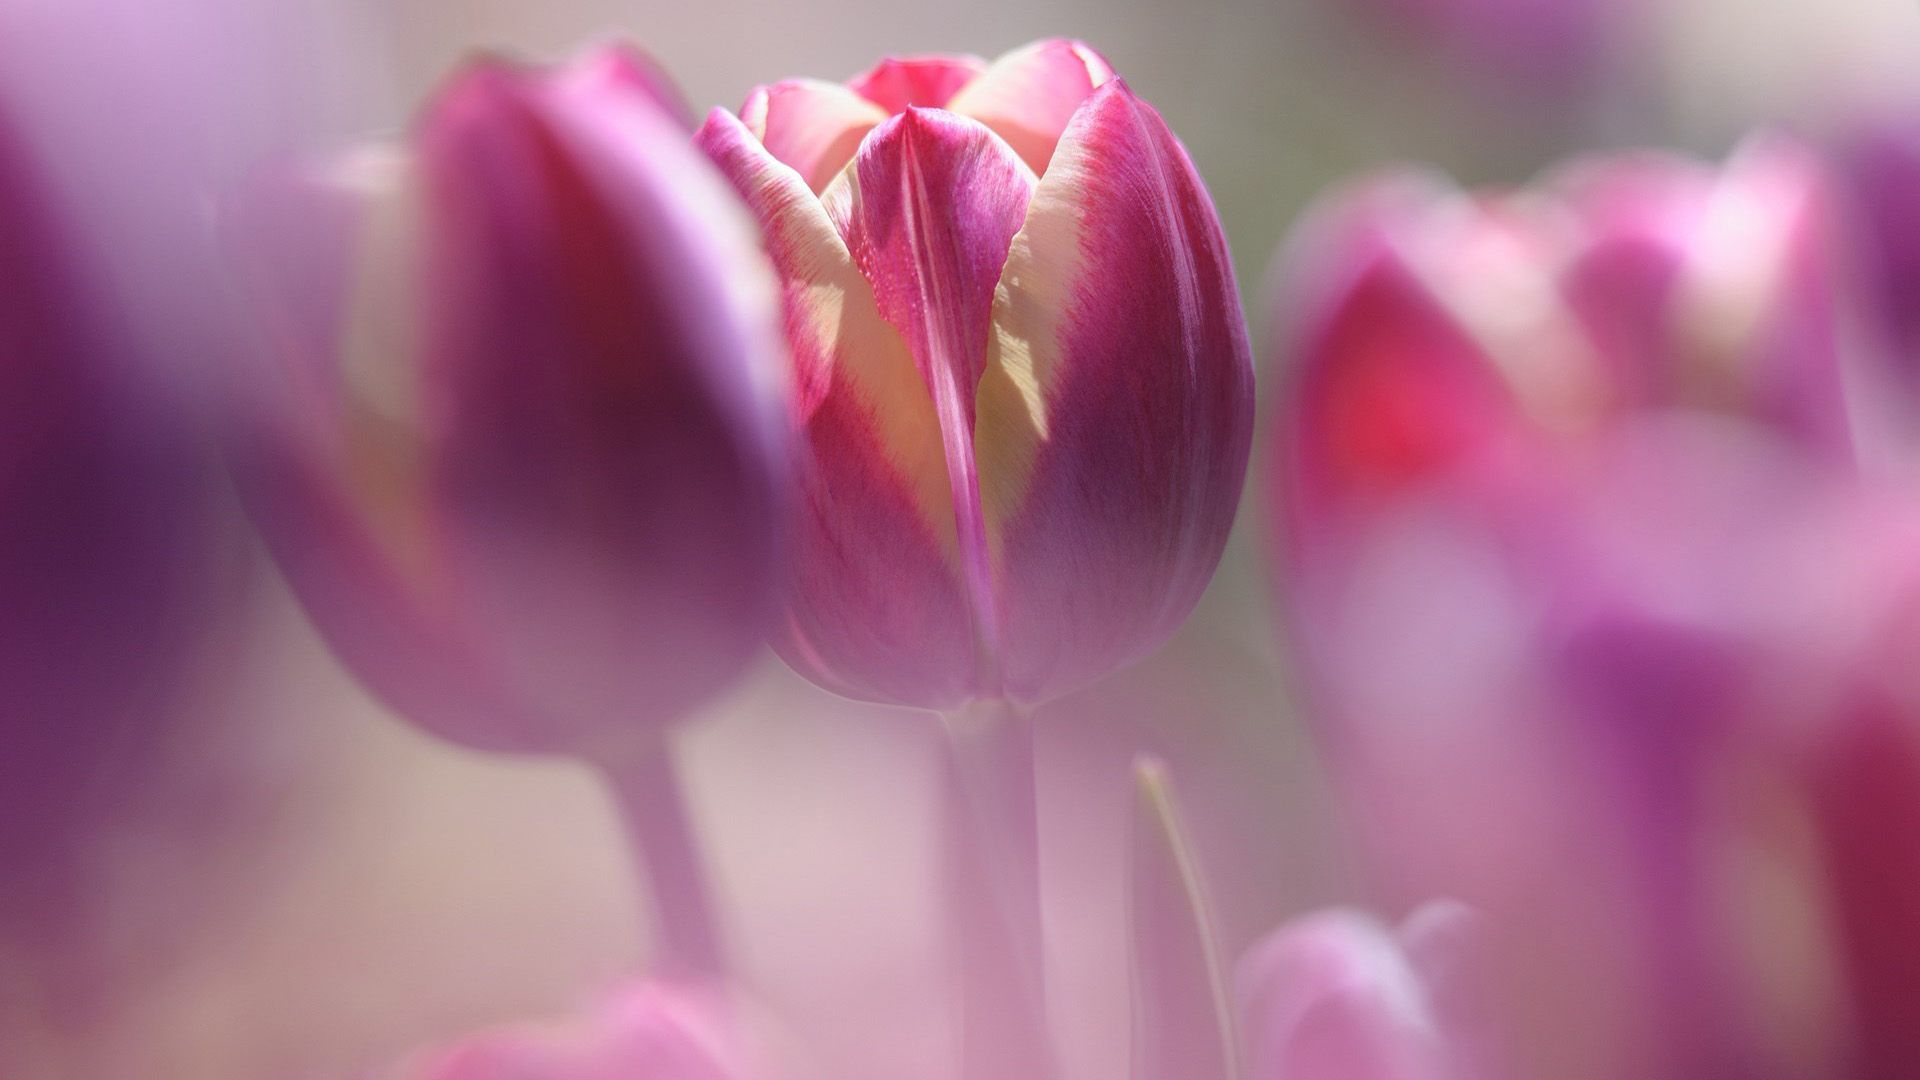 FLOWERS MACRO BUTTERFLY NATURE HQ WALLPAPER | Excellent Macro Tulip ...